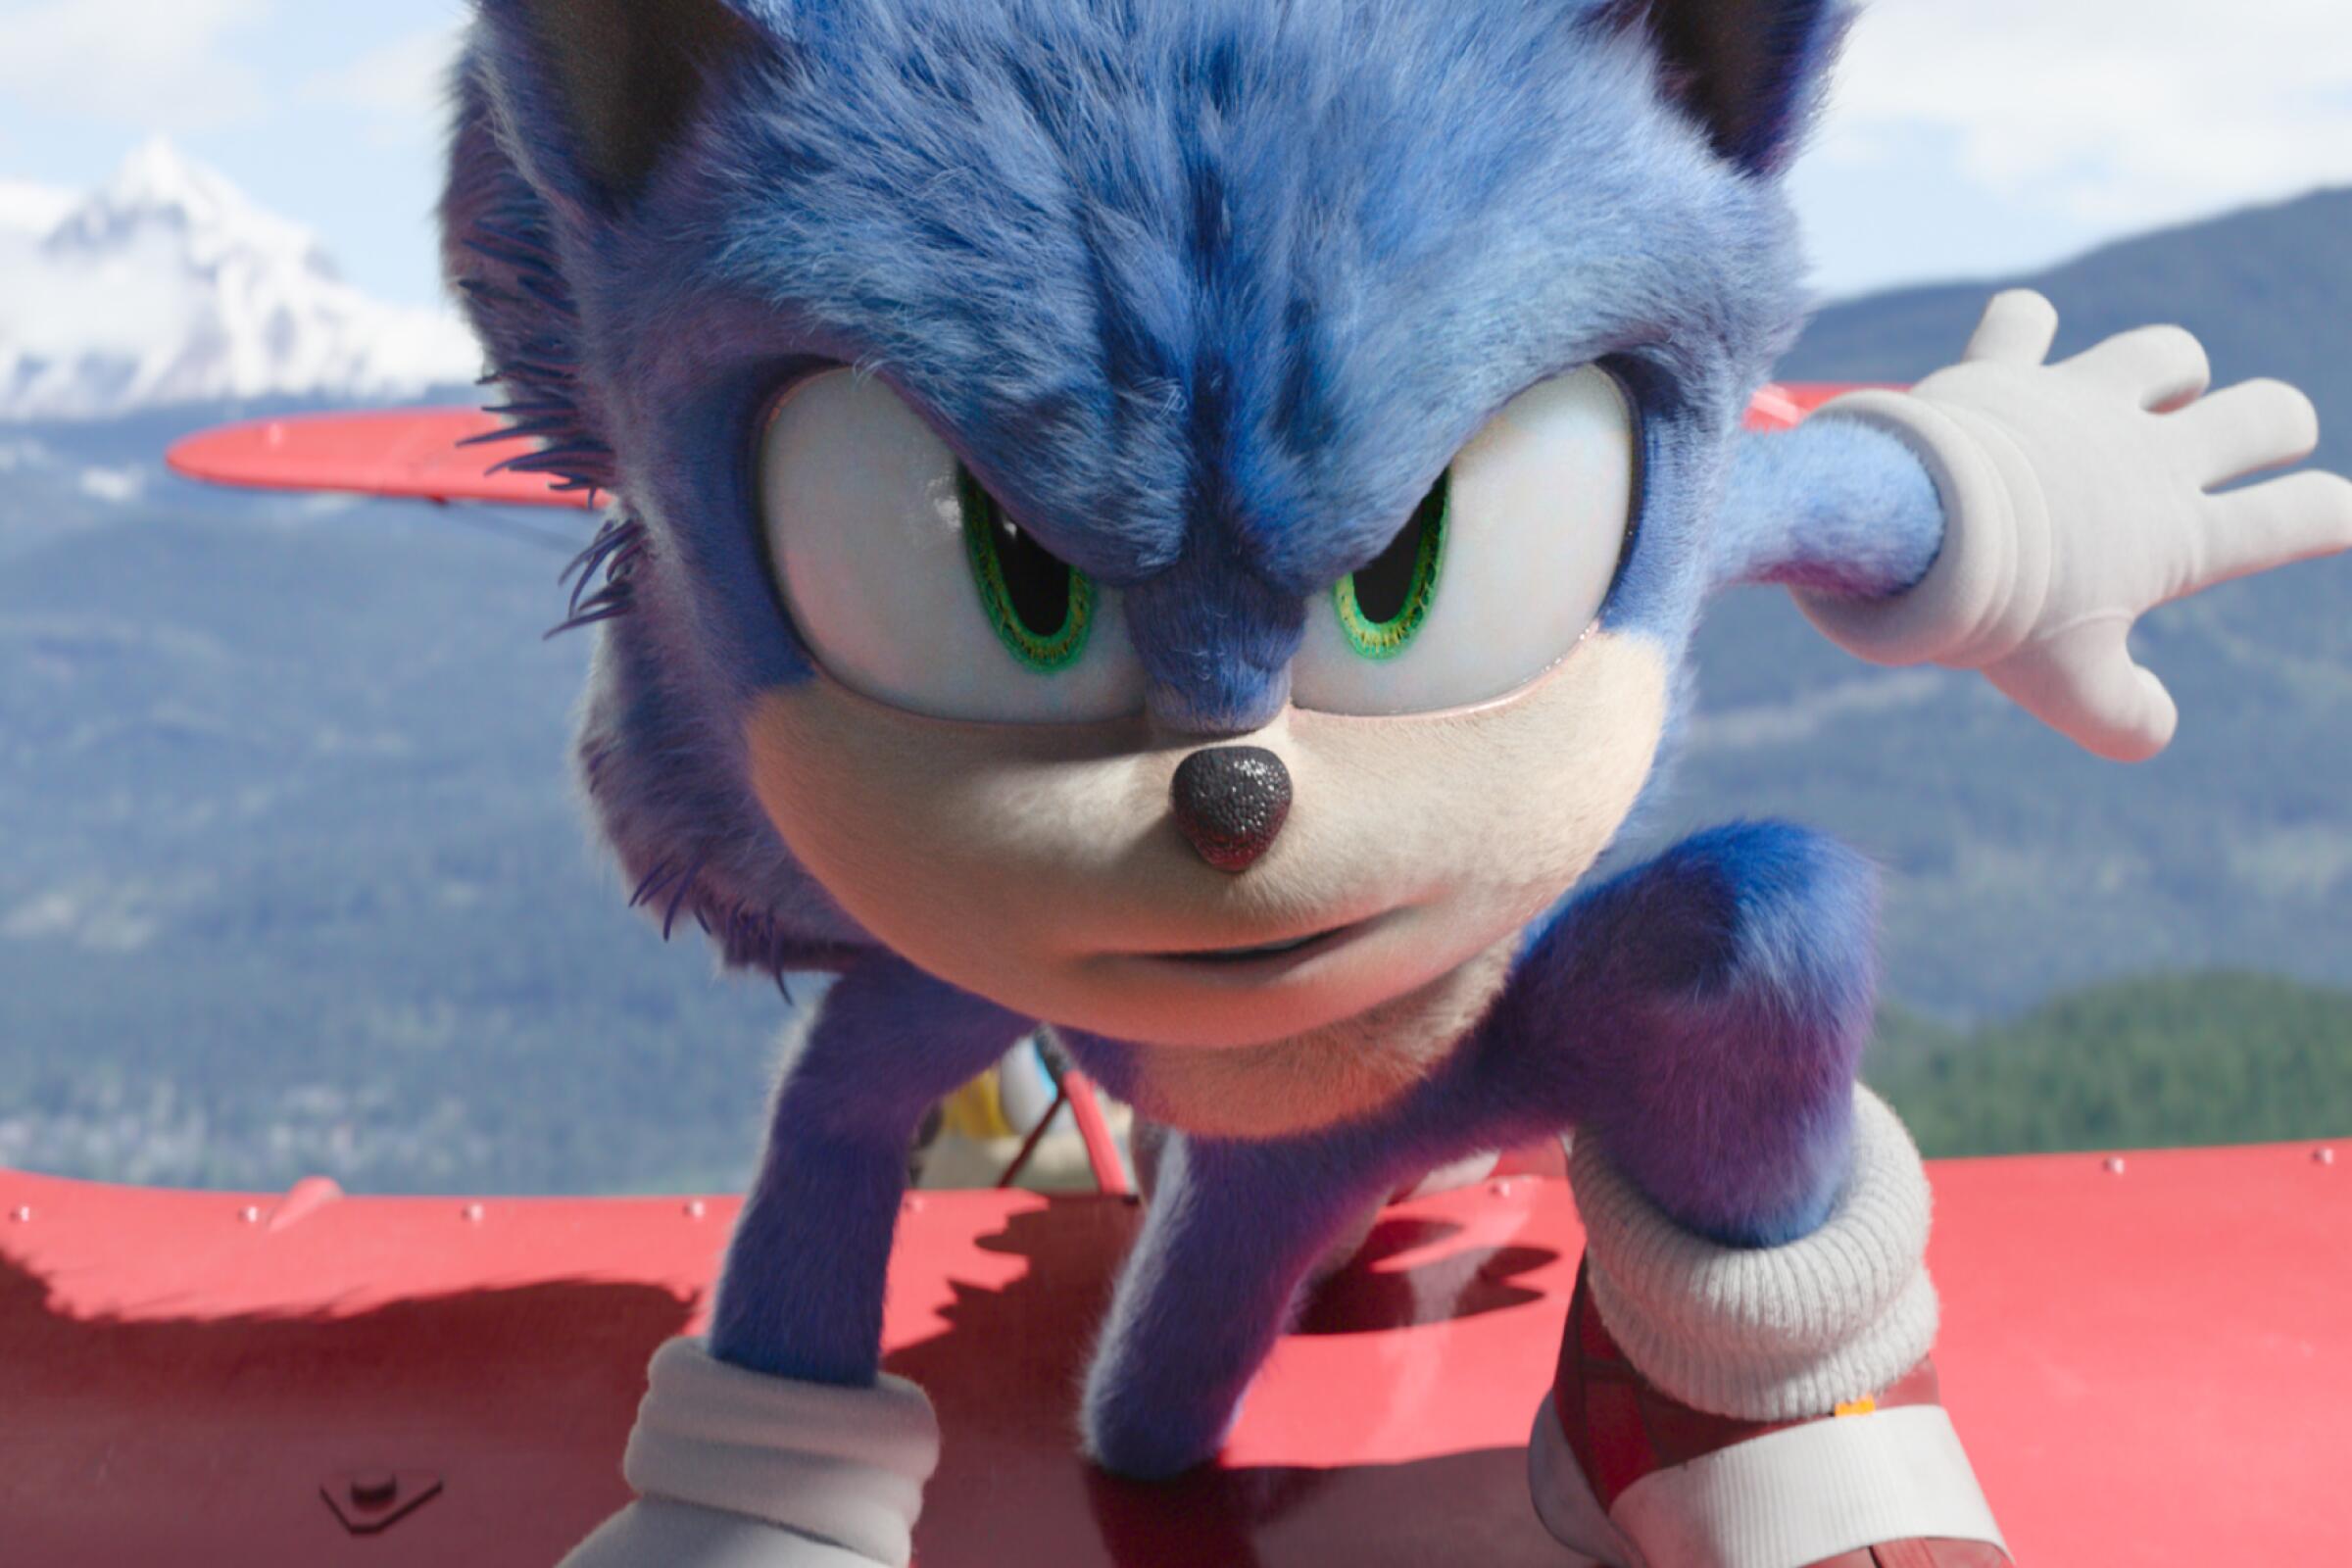 Sonic the Hedgehog 2 movie Super Bowl commercial leaked